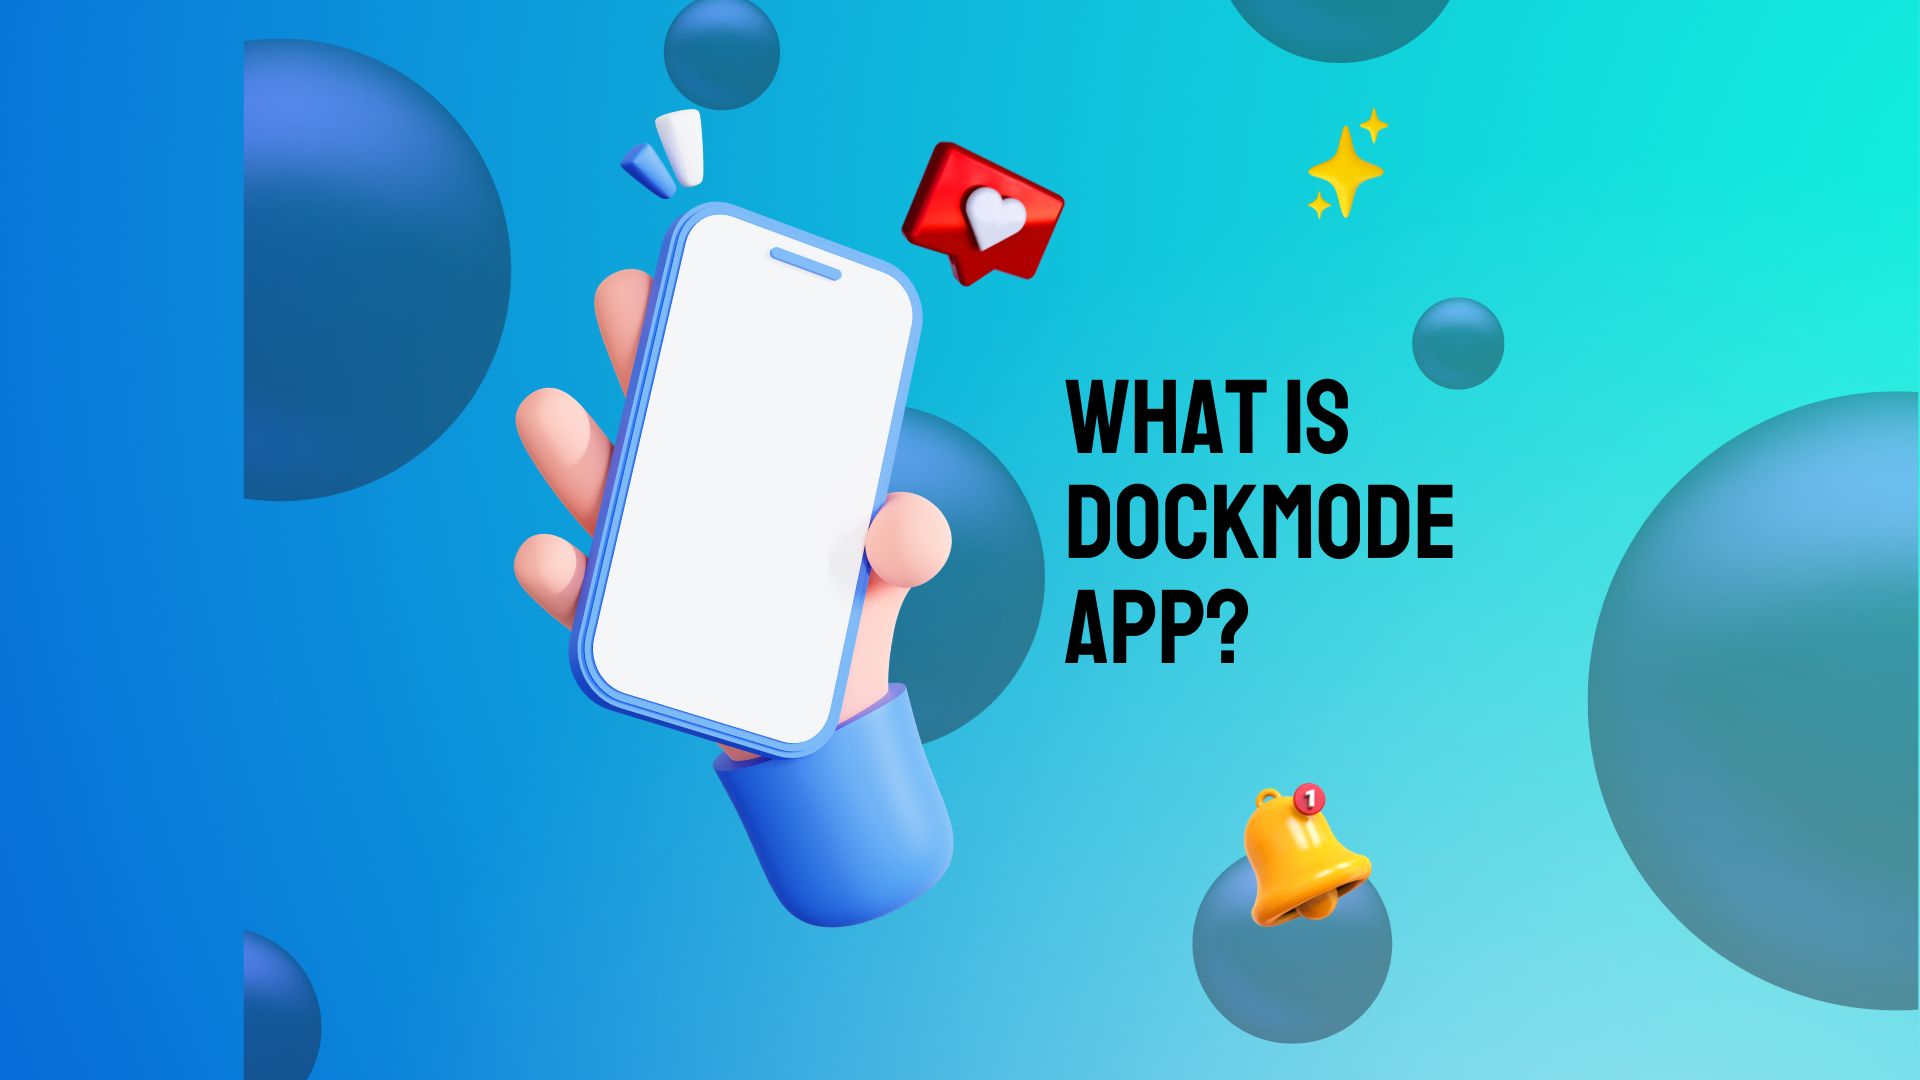 what is dockmode app?